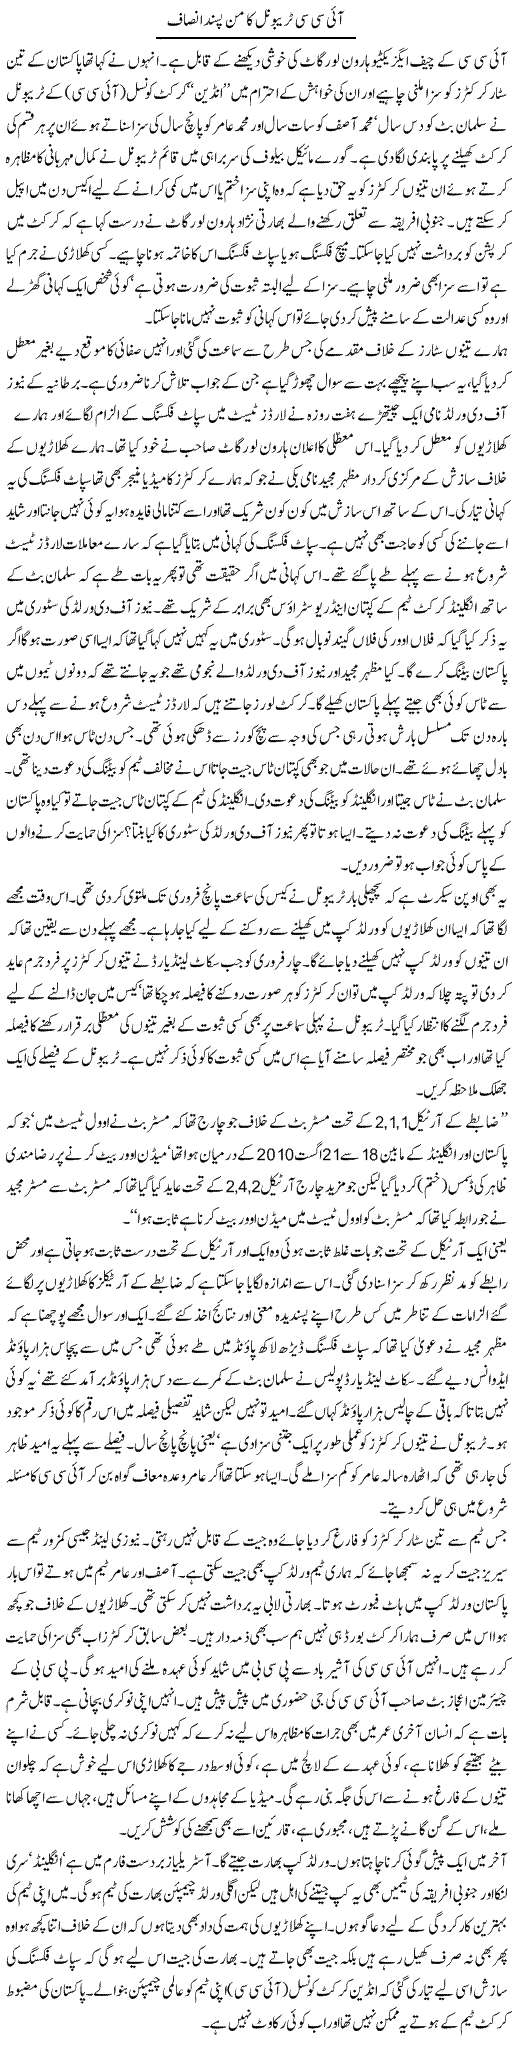 ICC Not Done Justice Express Column Iyaz Khan 8 February 2011